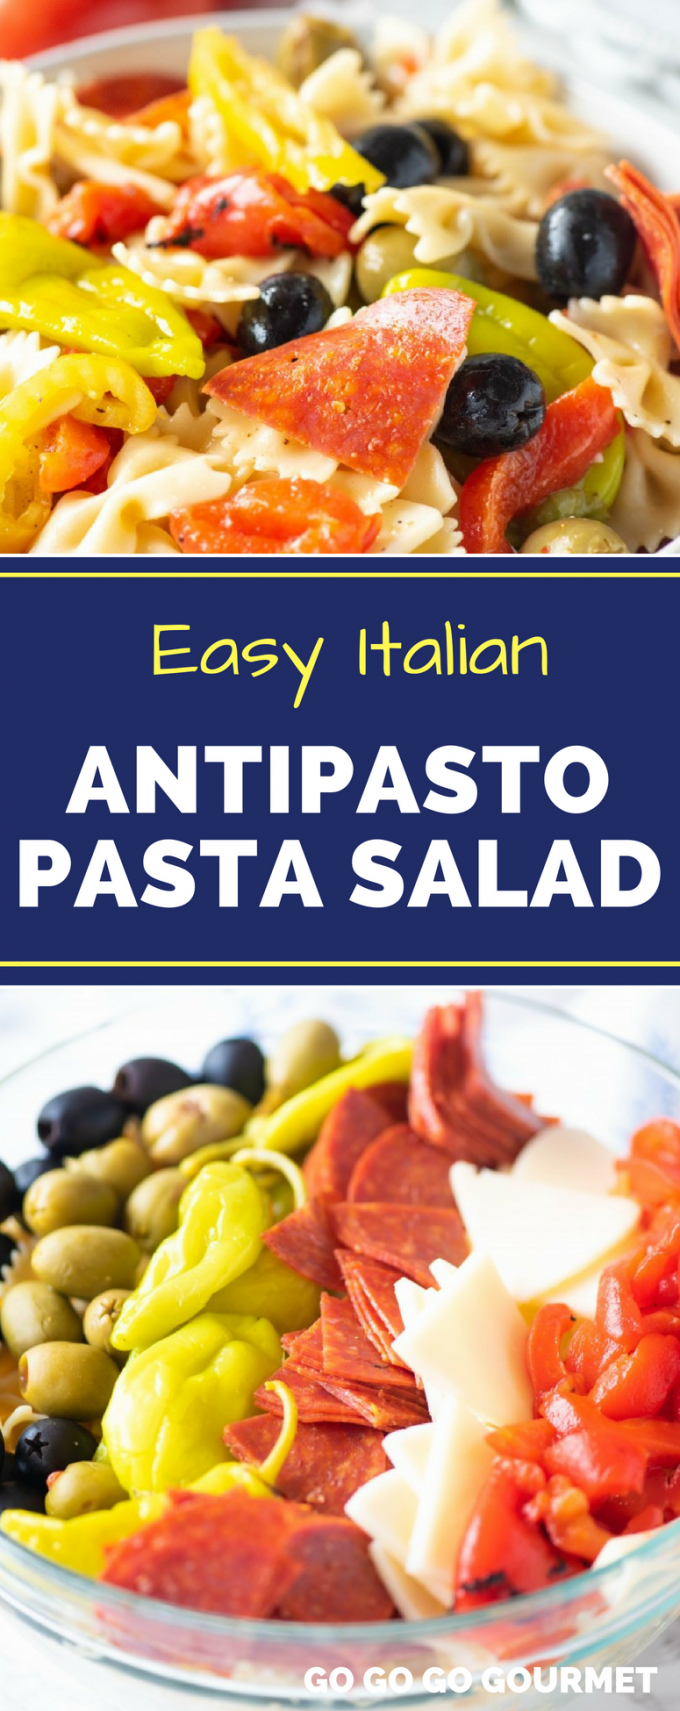 This easy Italian Antipasto Pasta Salad is one my favorite pasta salad recipes! Full of olives, roasted red peppers, pepperoni, Italian dressing and cheese, this will be your go to dish for all of your family get togethers! #antipastopastasalad #pastasaladrecipes #easypastasaladrecipes #gogogogourmet via @gogogogourmet